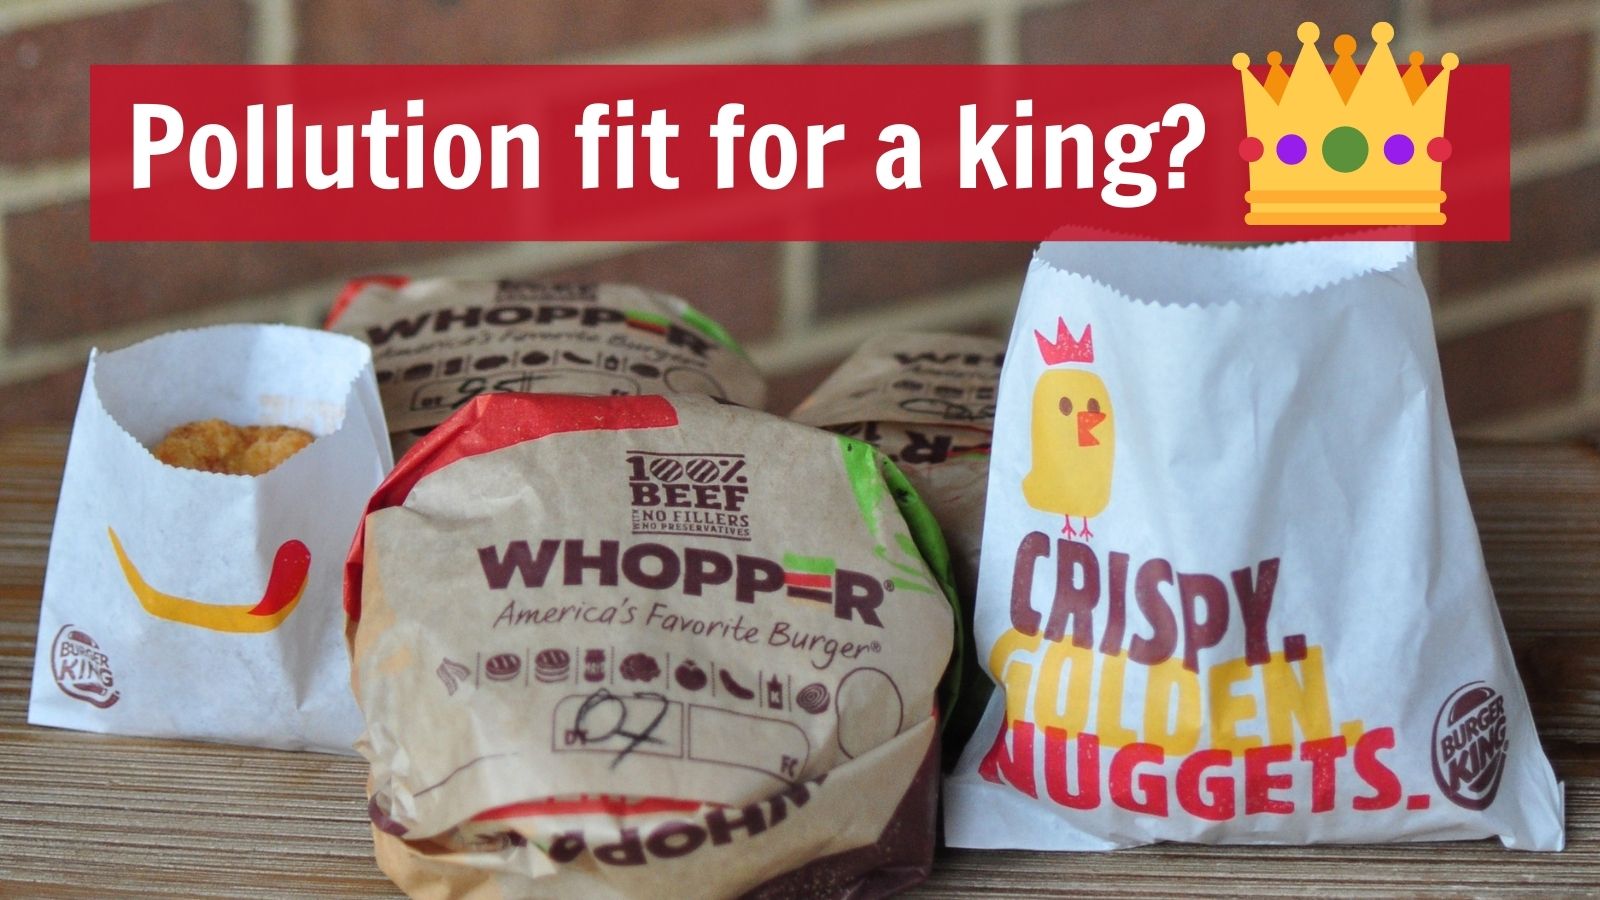 Burger King burgers - pollution fit for a king